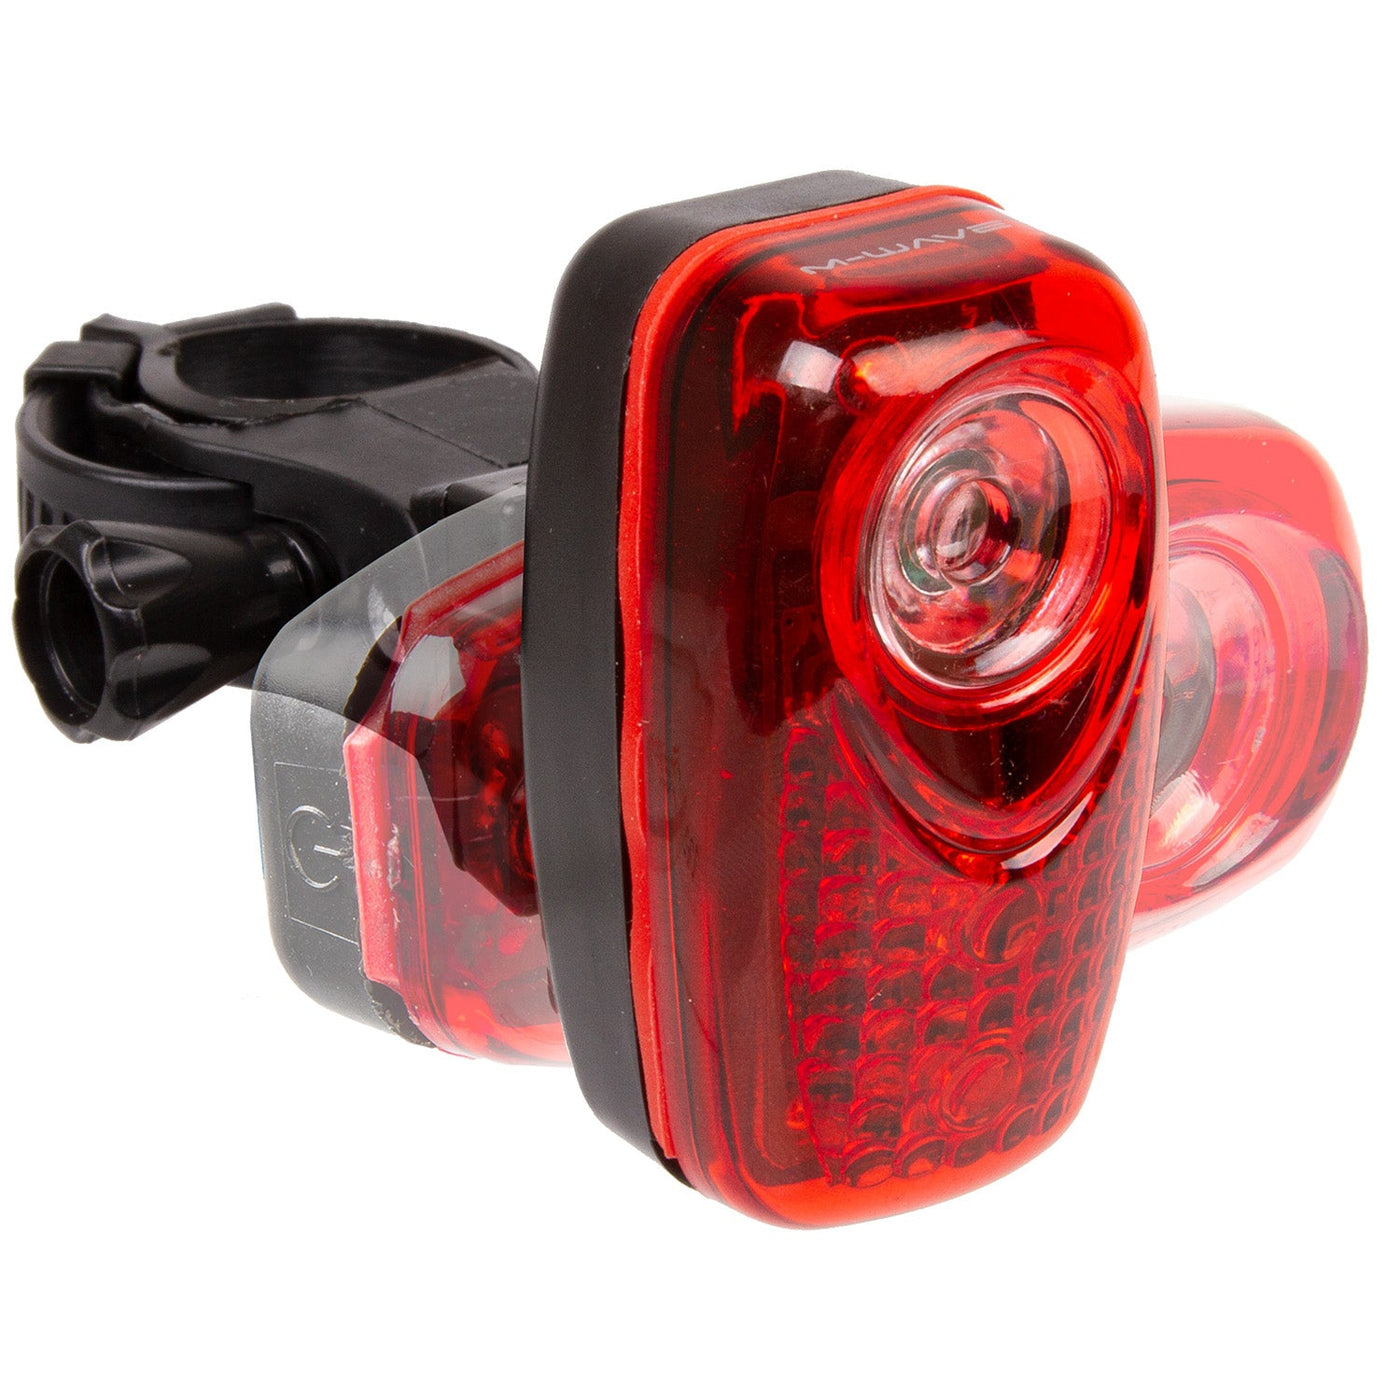 M-Wave Helios 3.2 S Battery Flash Light - Cyclop.in